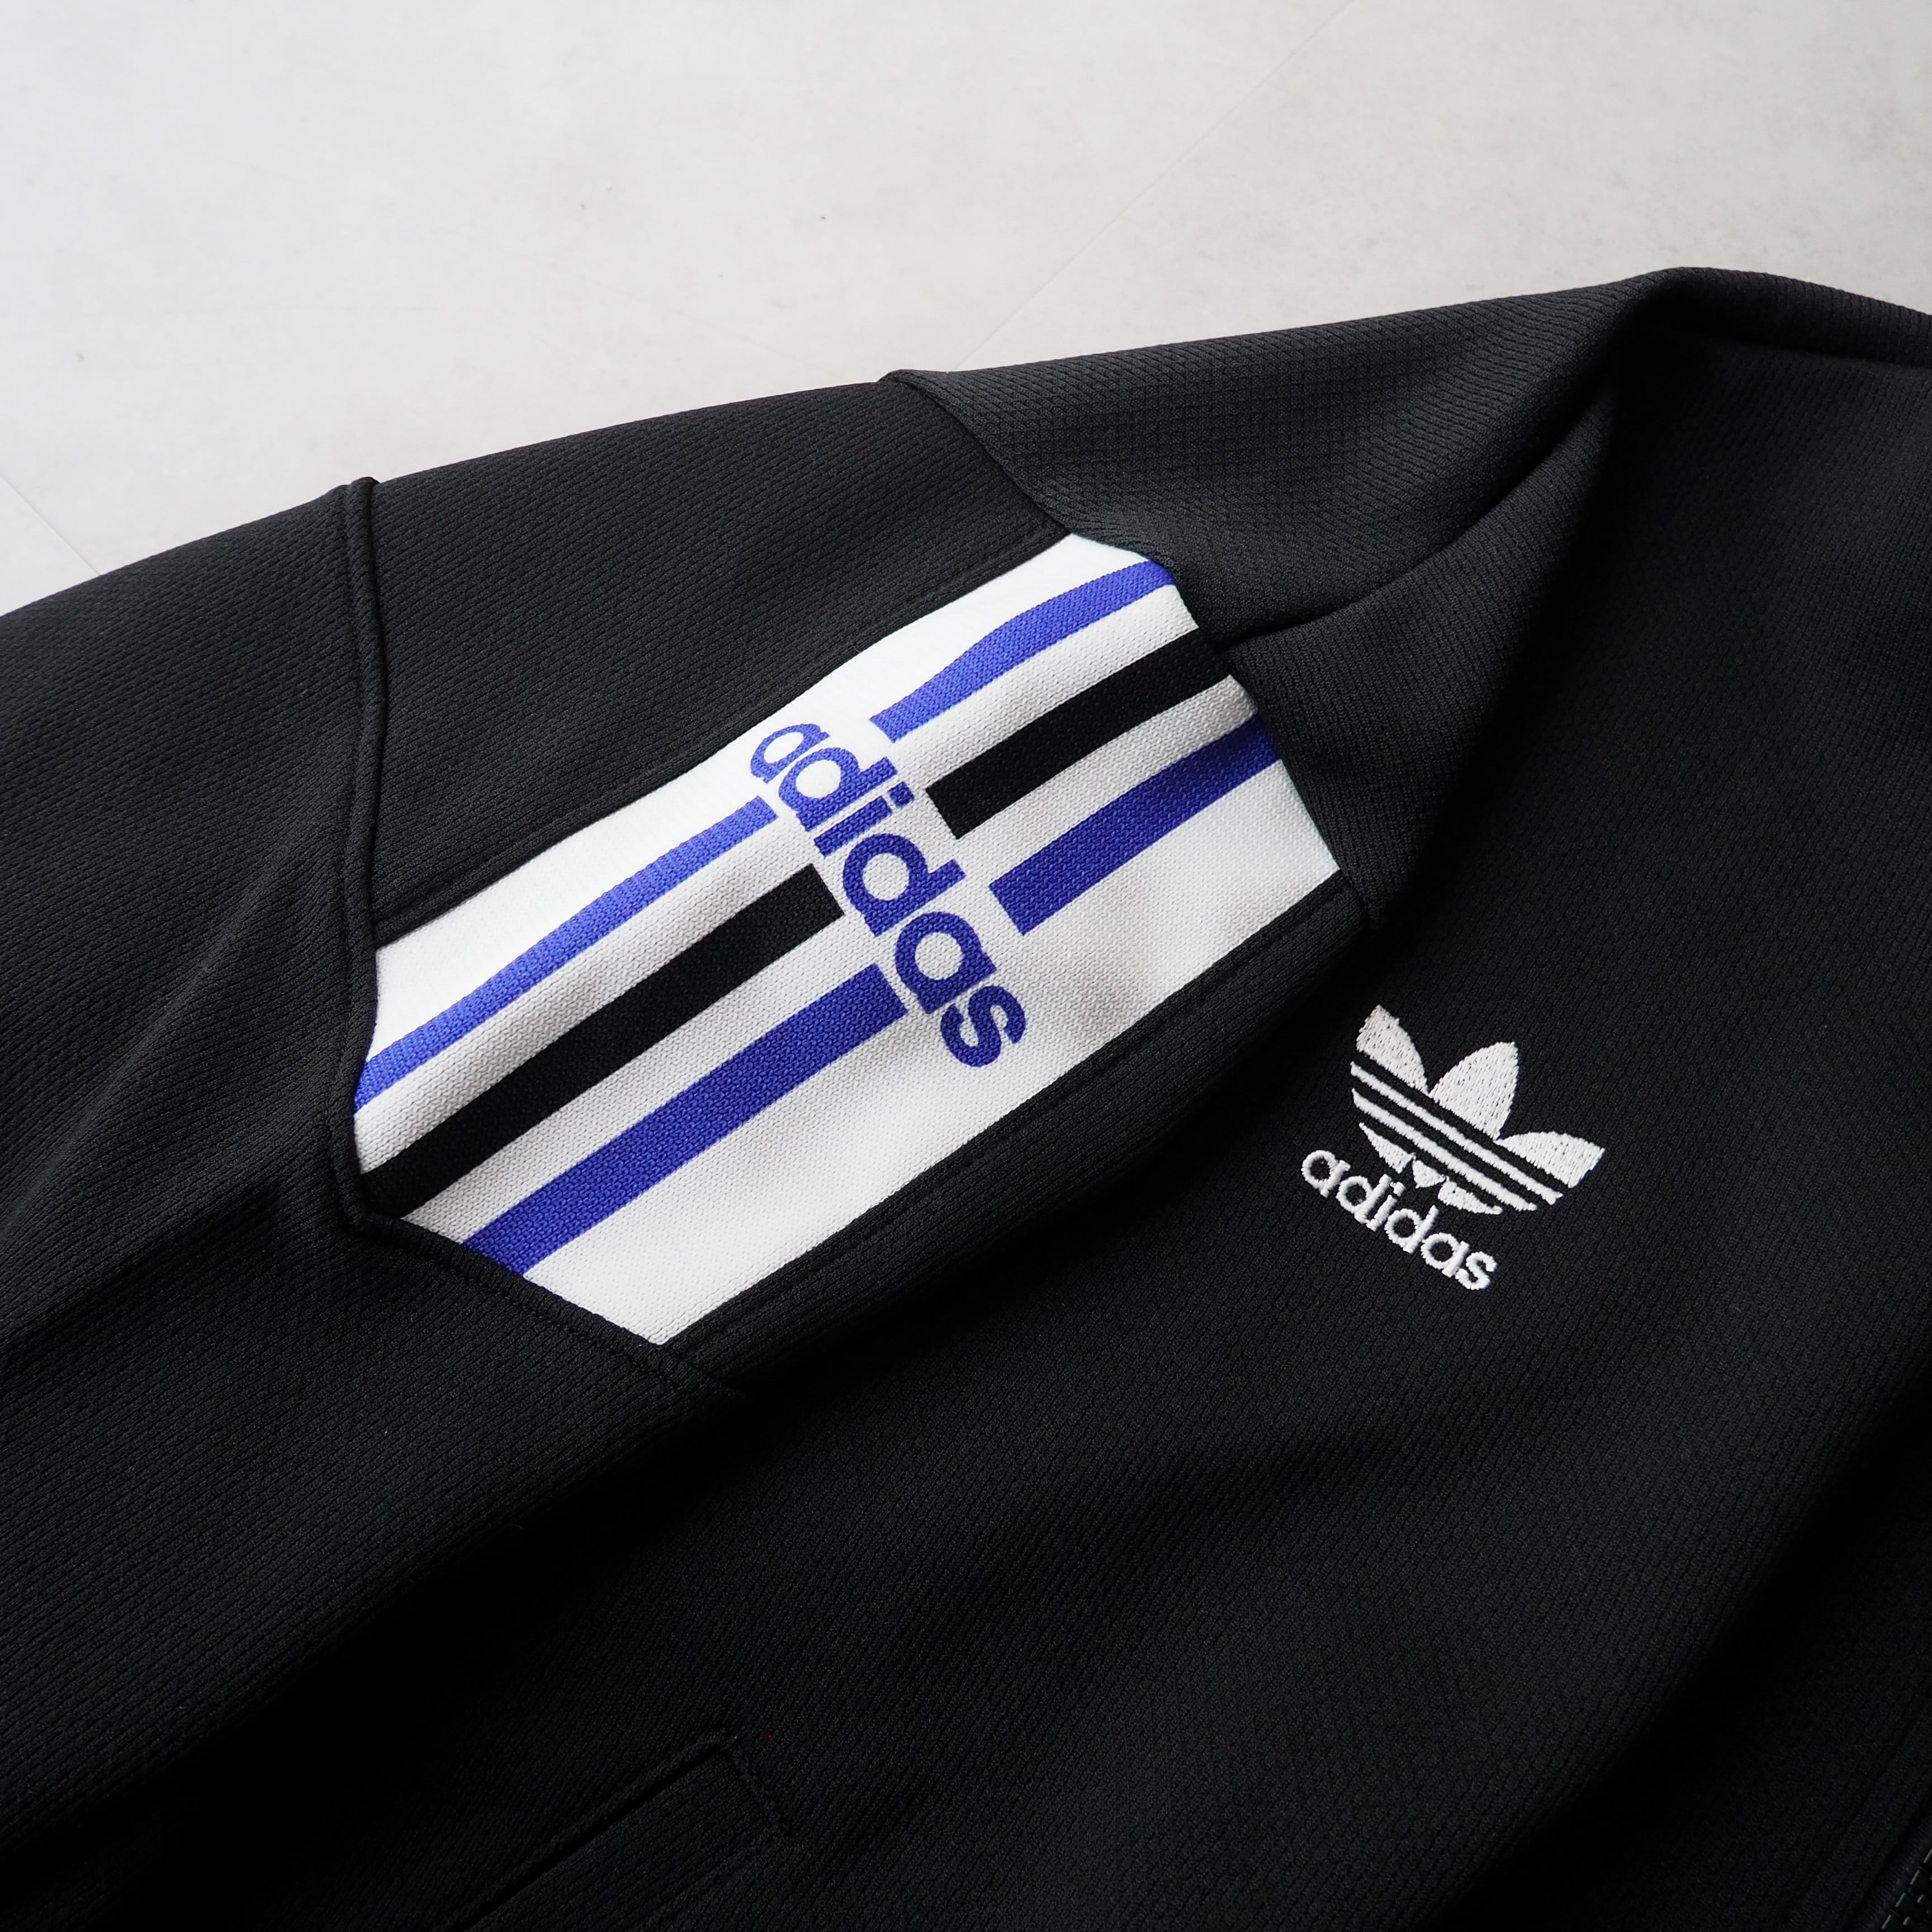 80s-90s “ADIDAS” by DESCENTE track jacket & pants set up 80